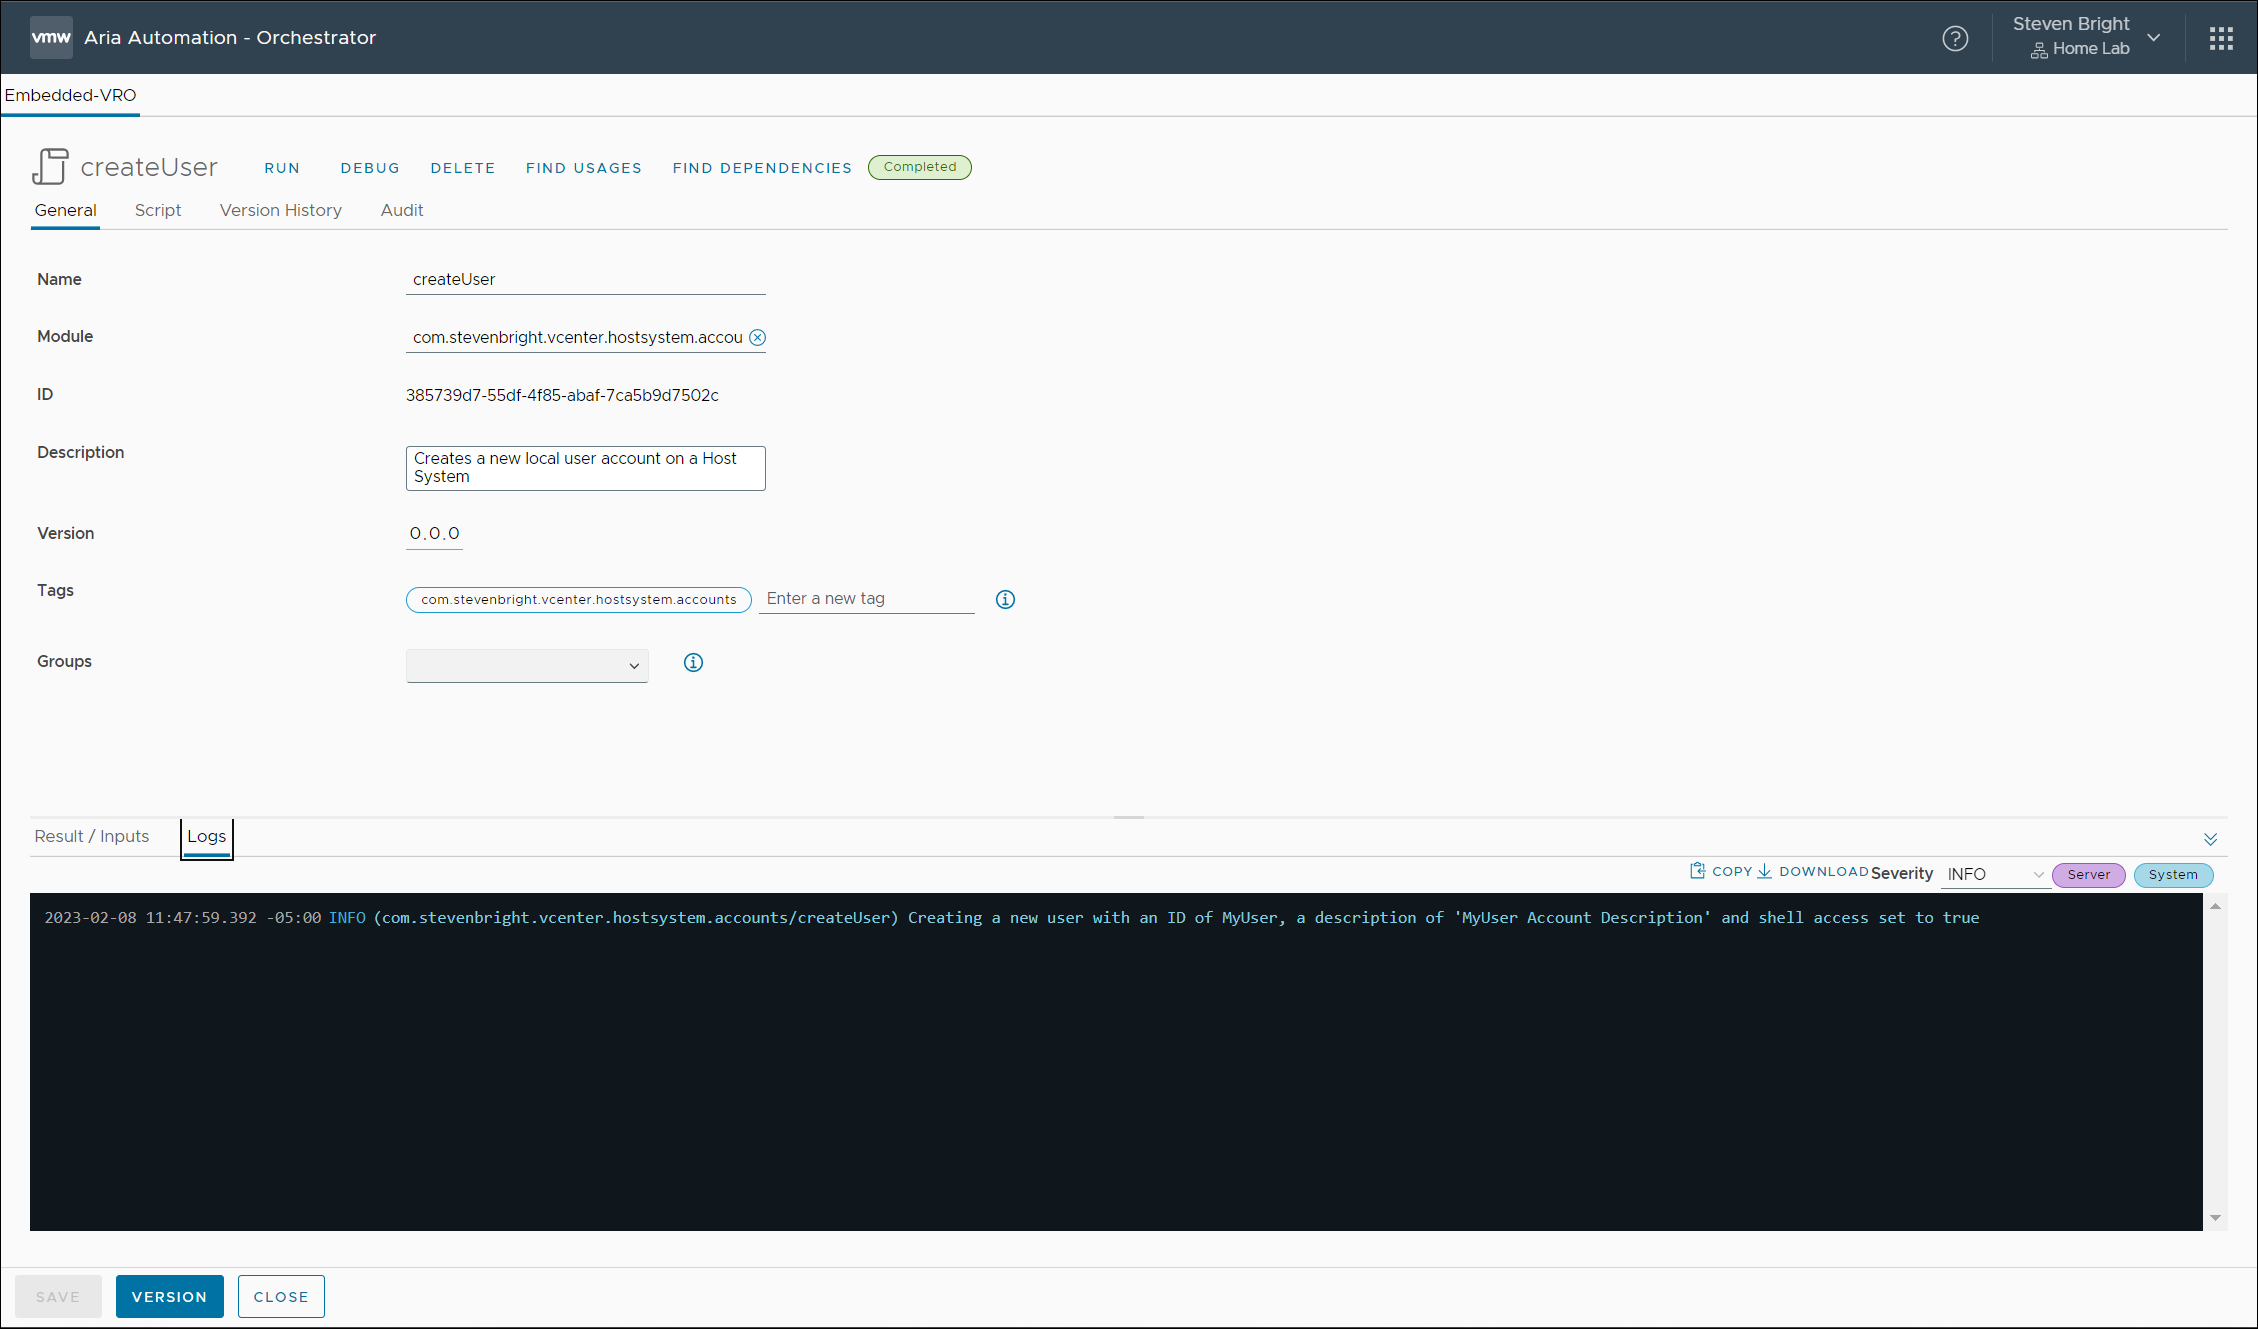 Screenshot of the VMware Aria Automation Orchestrator log listing the details of the local user account being created